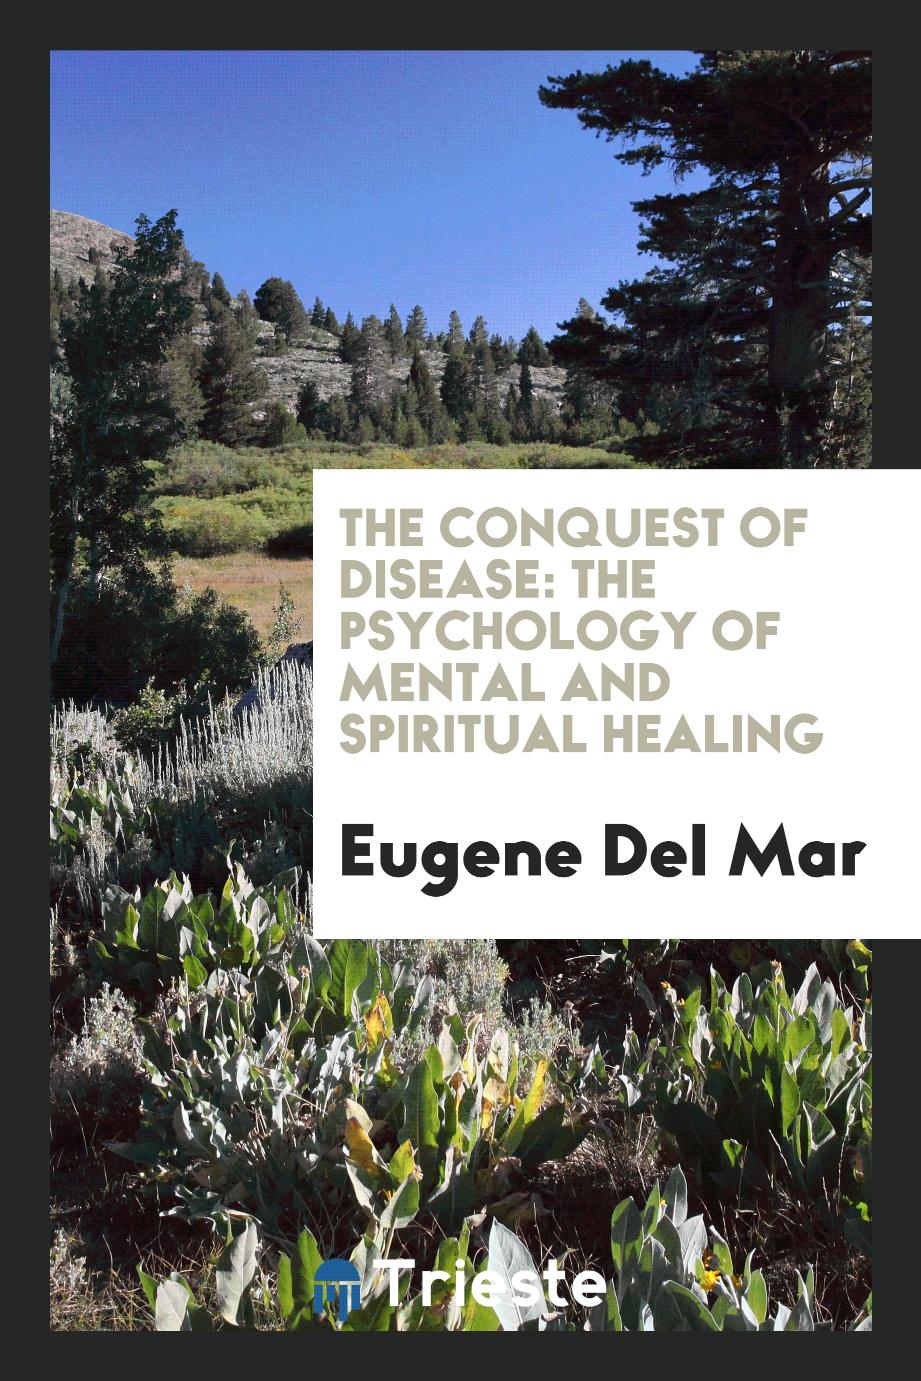 The conquest of disease: the psychology of mental and spiritual healing